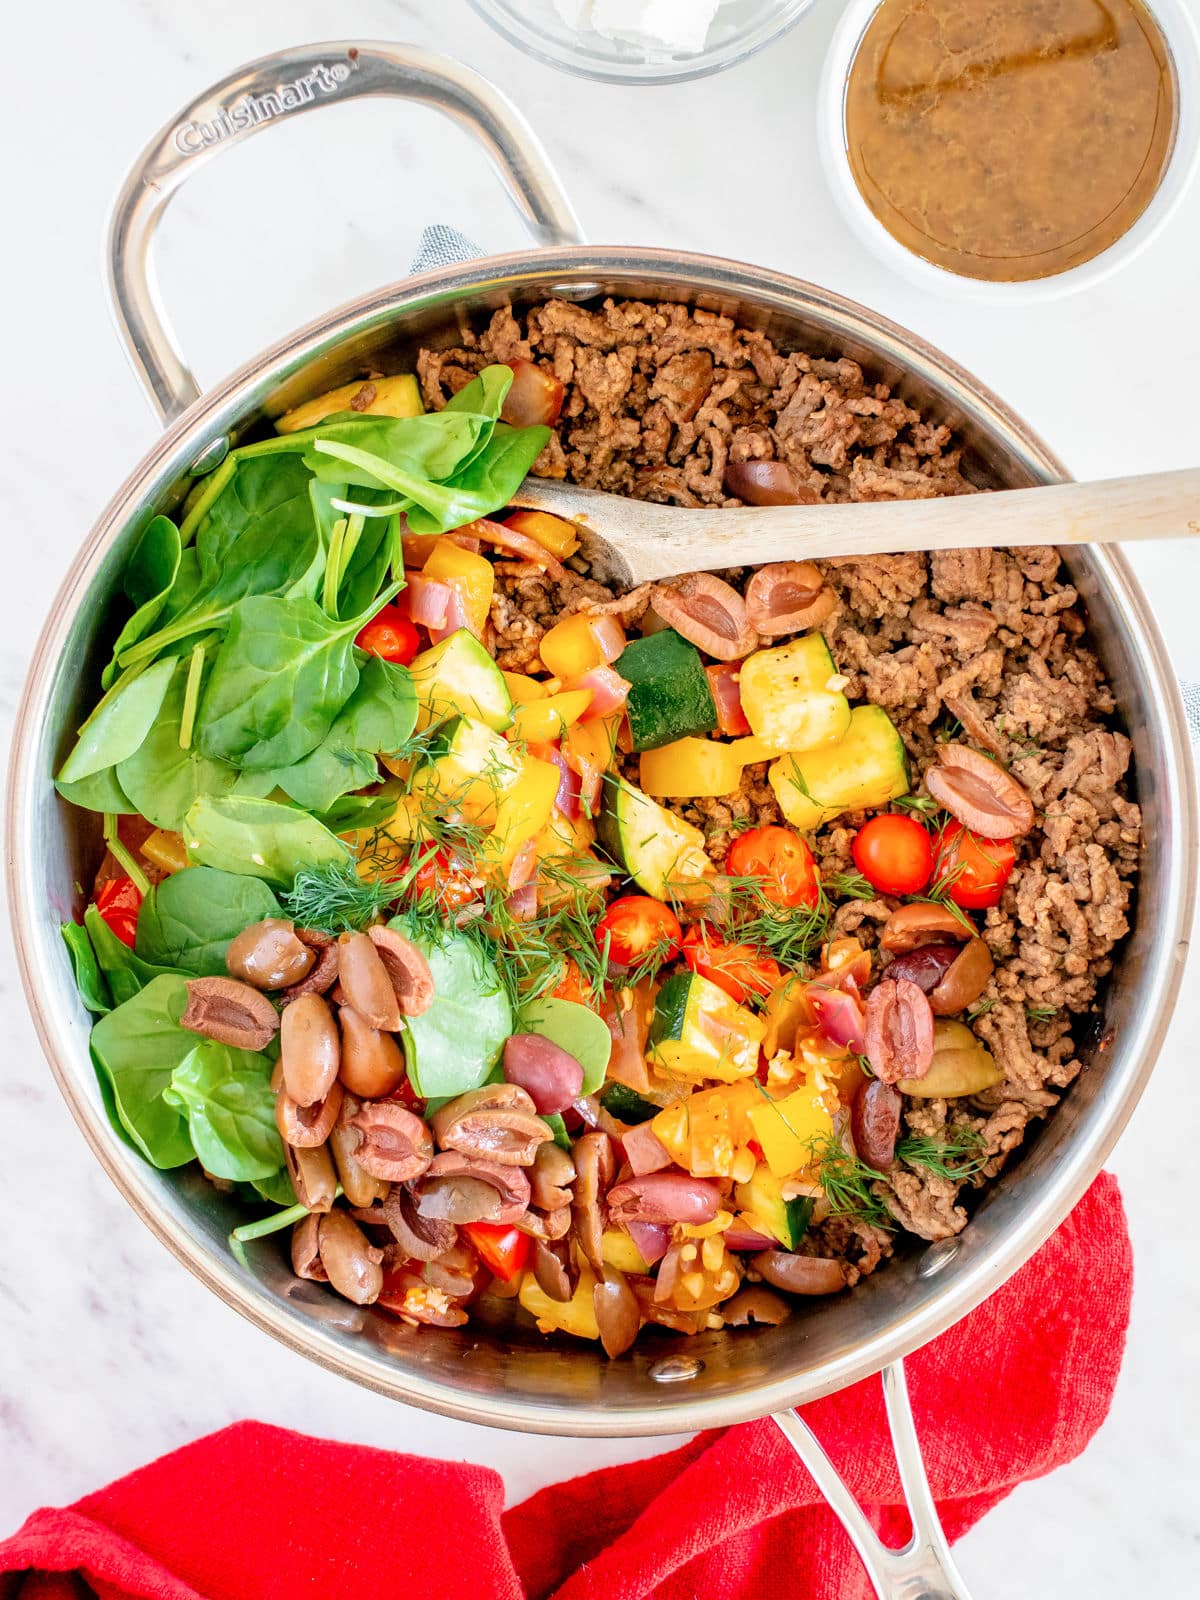 A colorful one-pot meal with ground meat, fresh spinach, cherry tomatoes, diced yellow bell peppers, and kidney beans, garnished with dill, ready to be served.